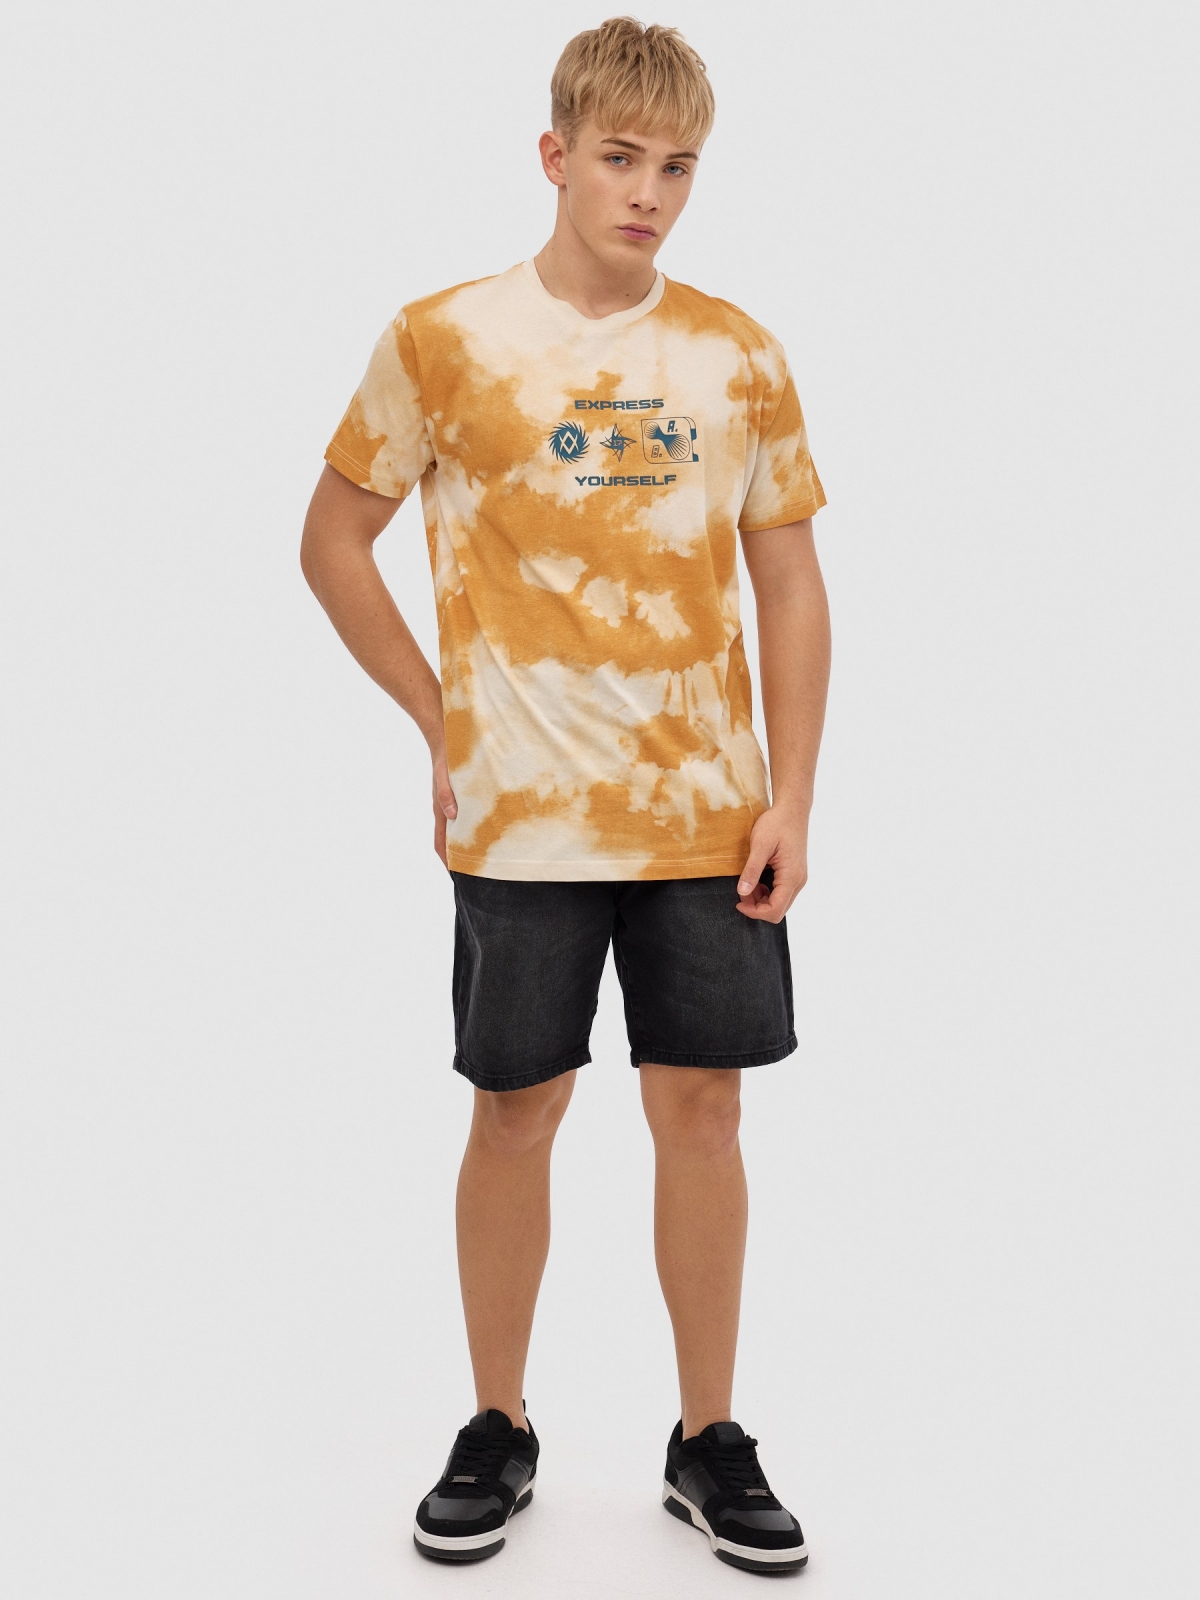 TIE&DYE yourself T-shirt sand front view